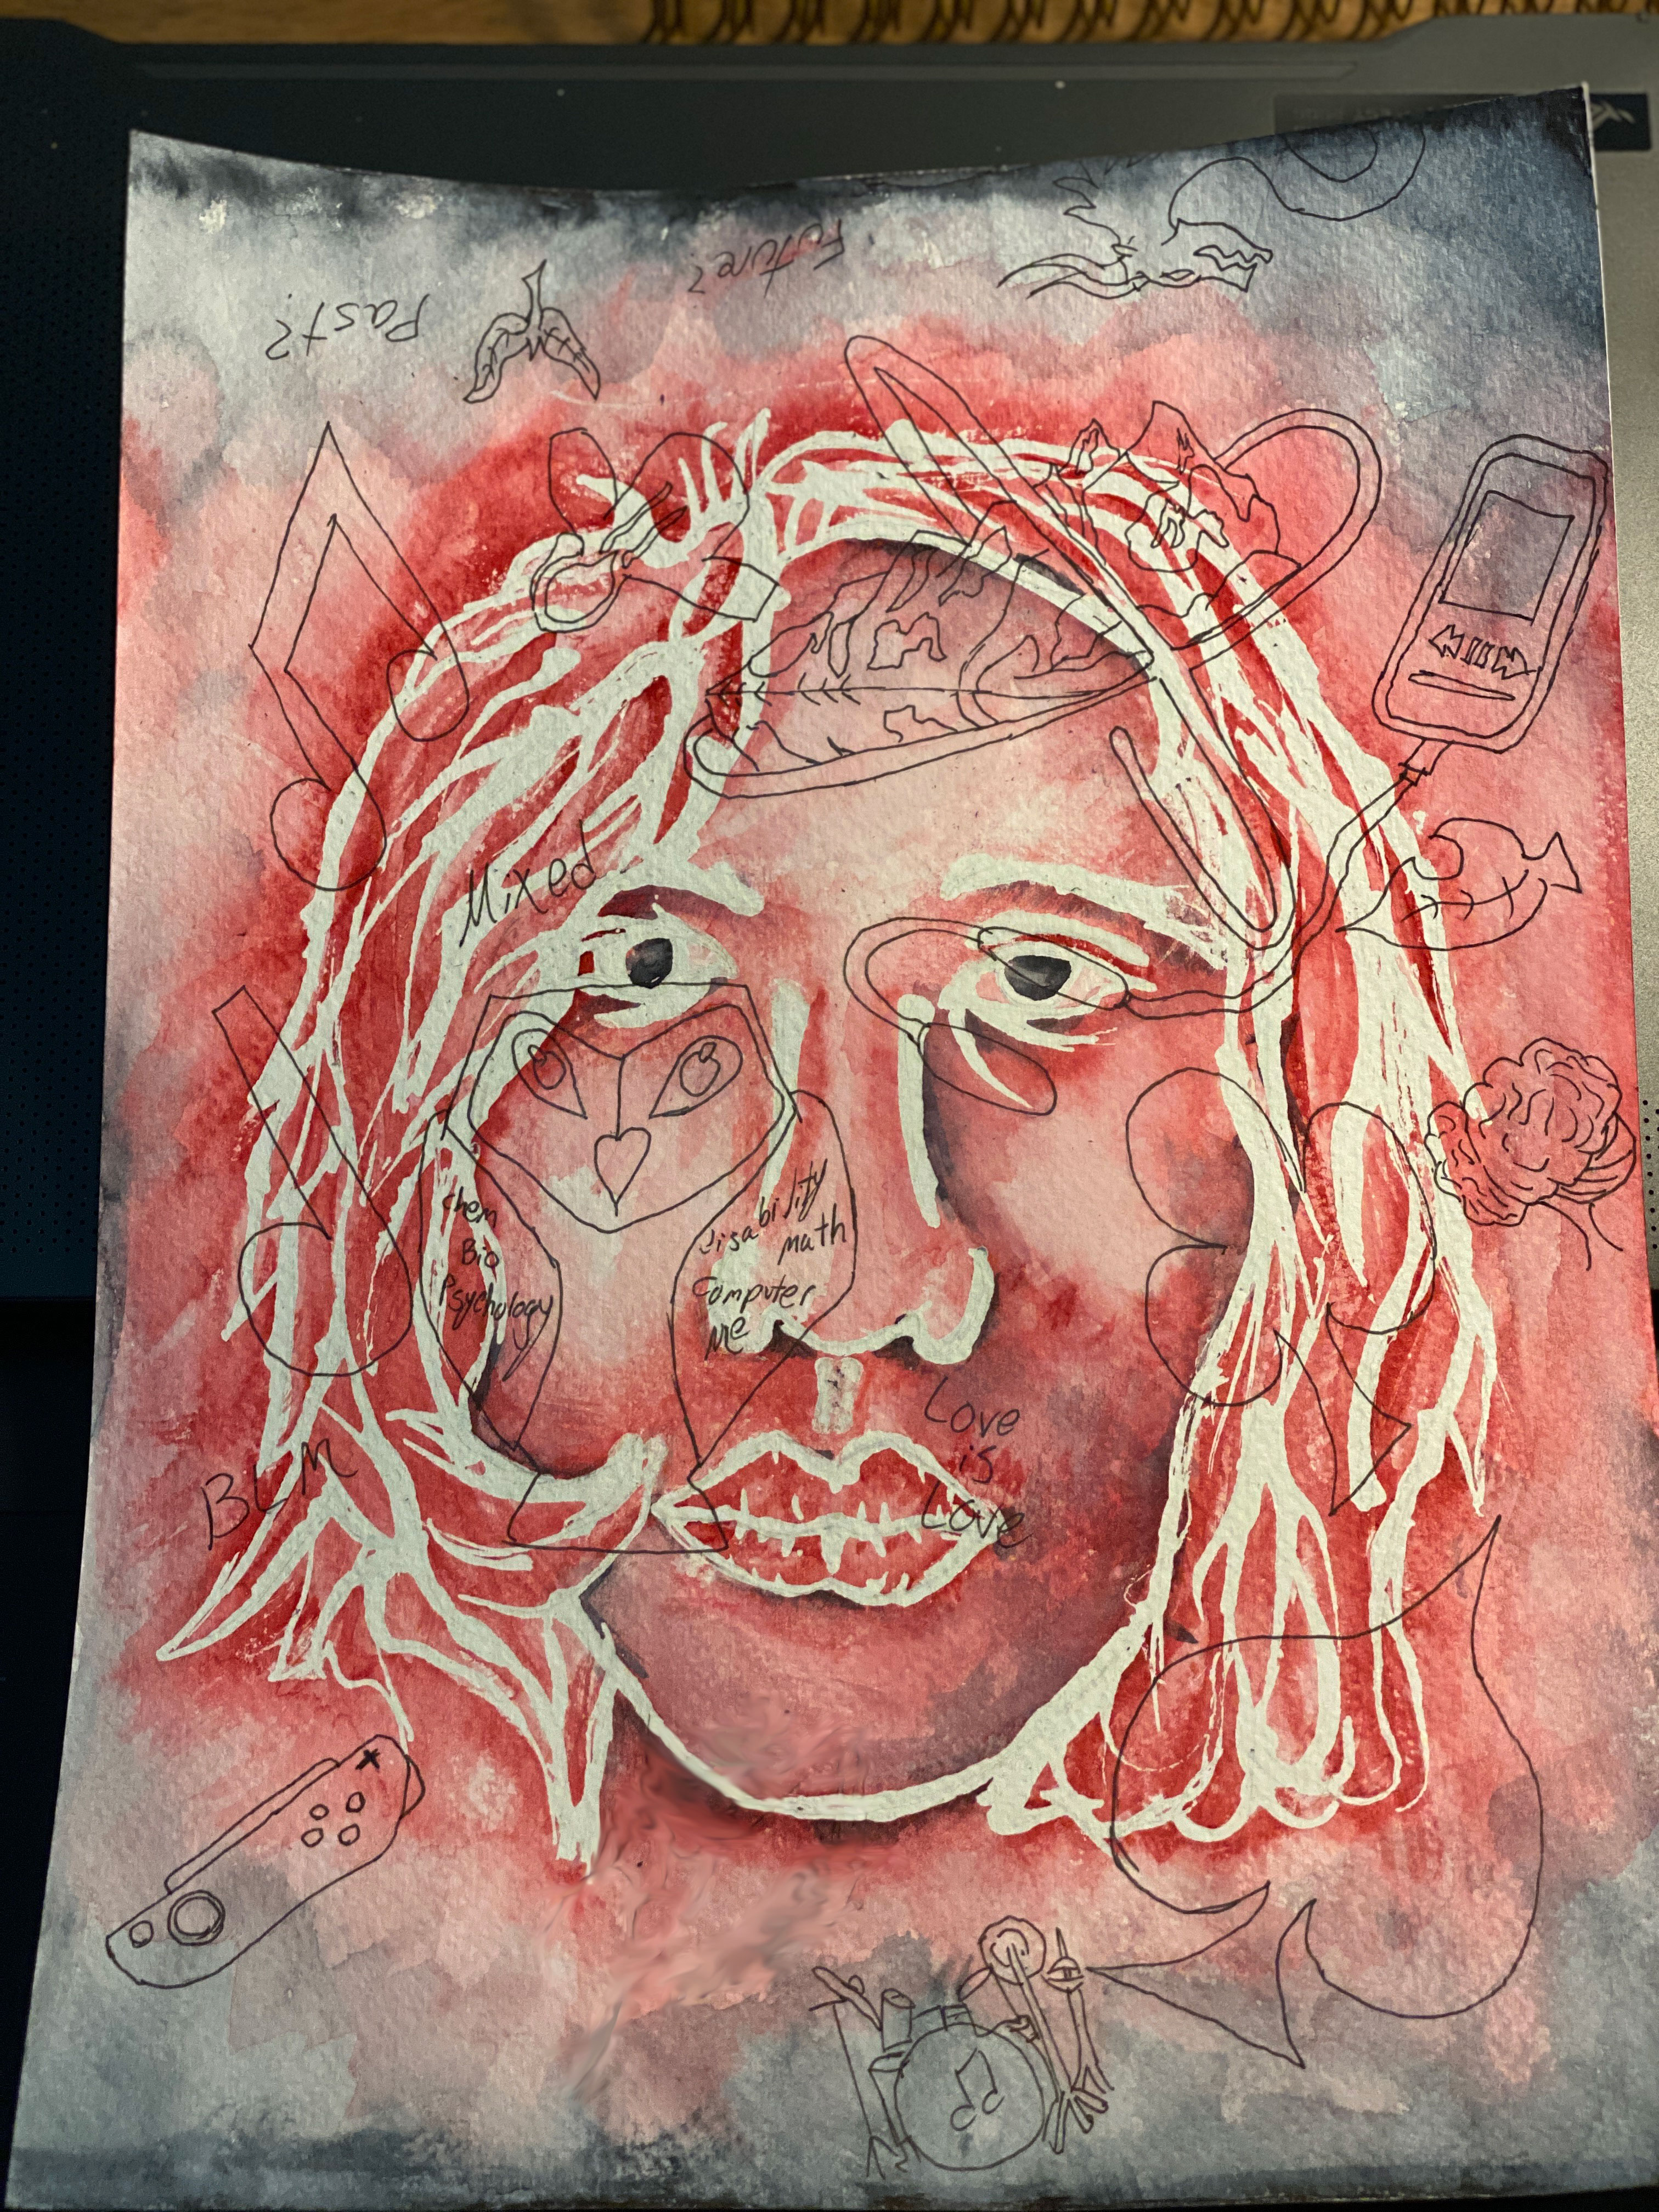 Watercolor red face with blank ink drawings surrounding and on top of image